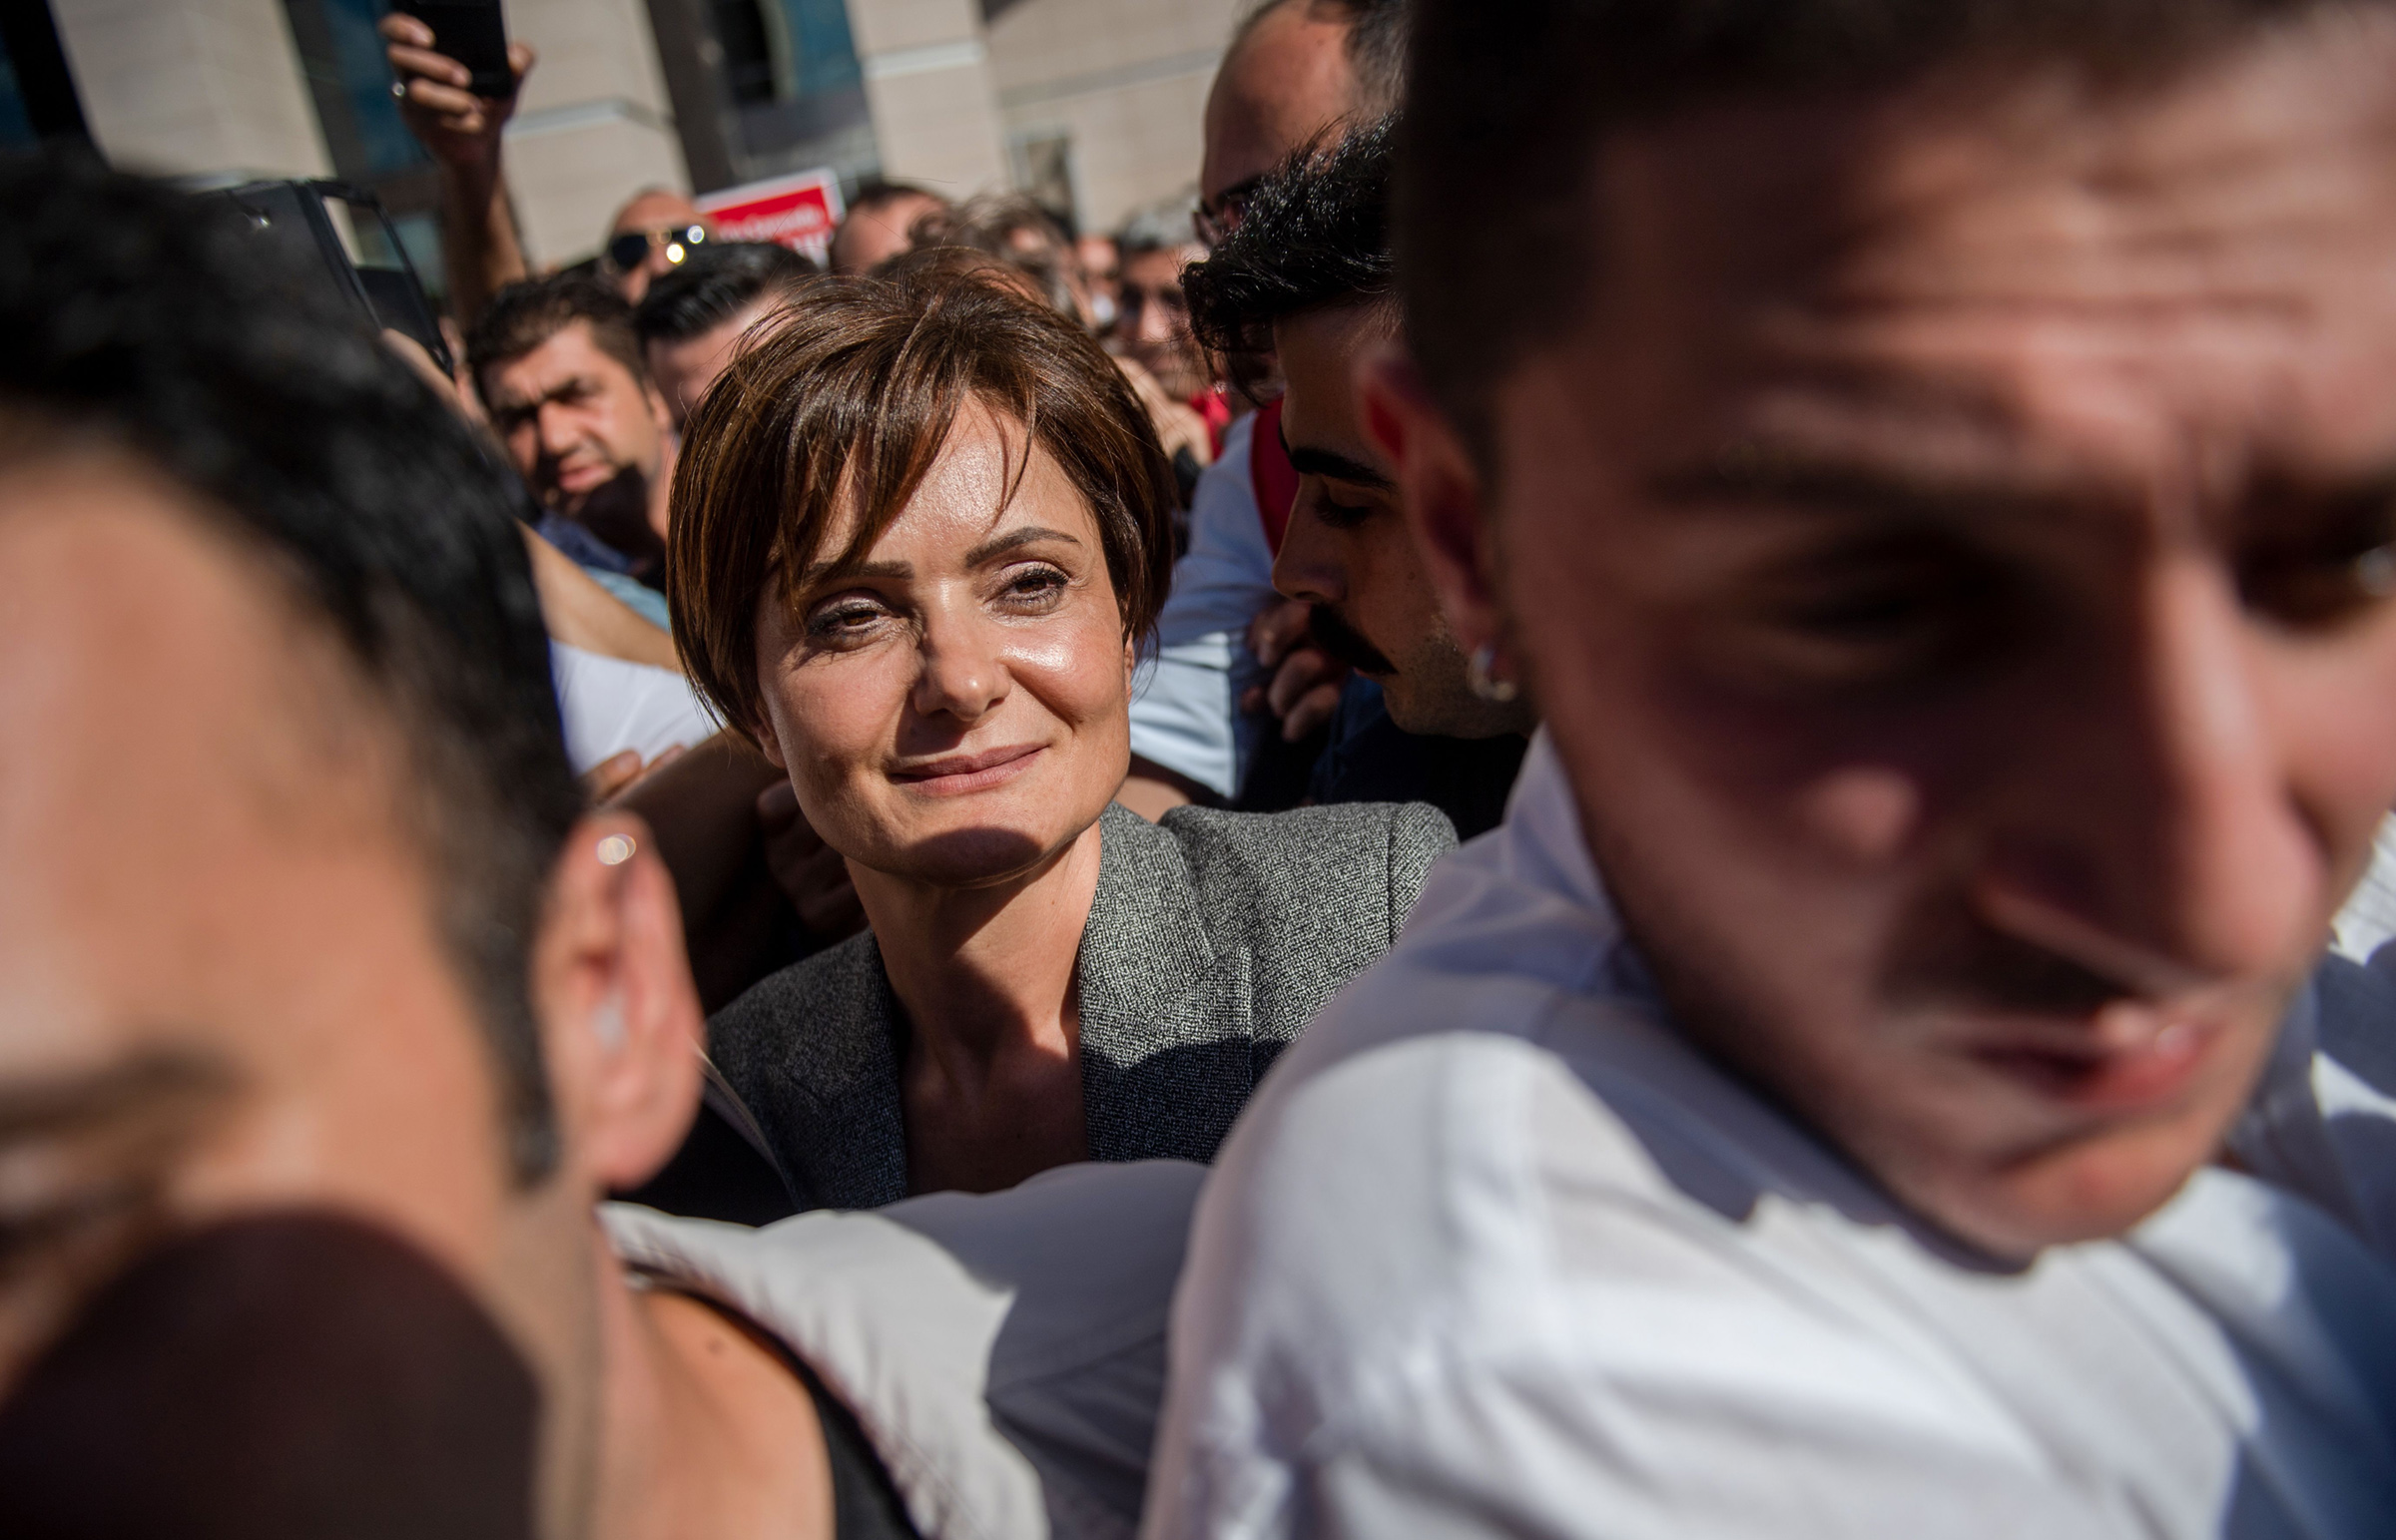 Dr. Canan Kaftancioglu, center, leaves the Caglayan courthouse in Istanbul on Sept. 6, 2019. (Bulent Kilic—AFP/Getty Images)